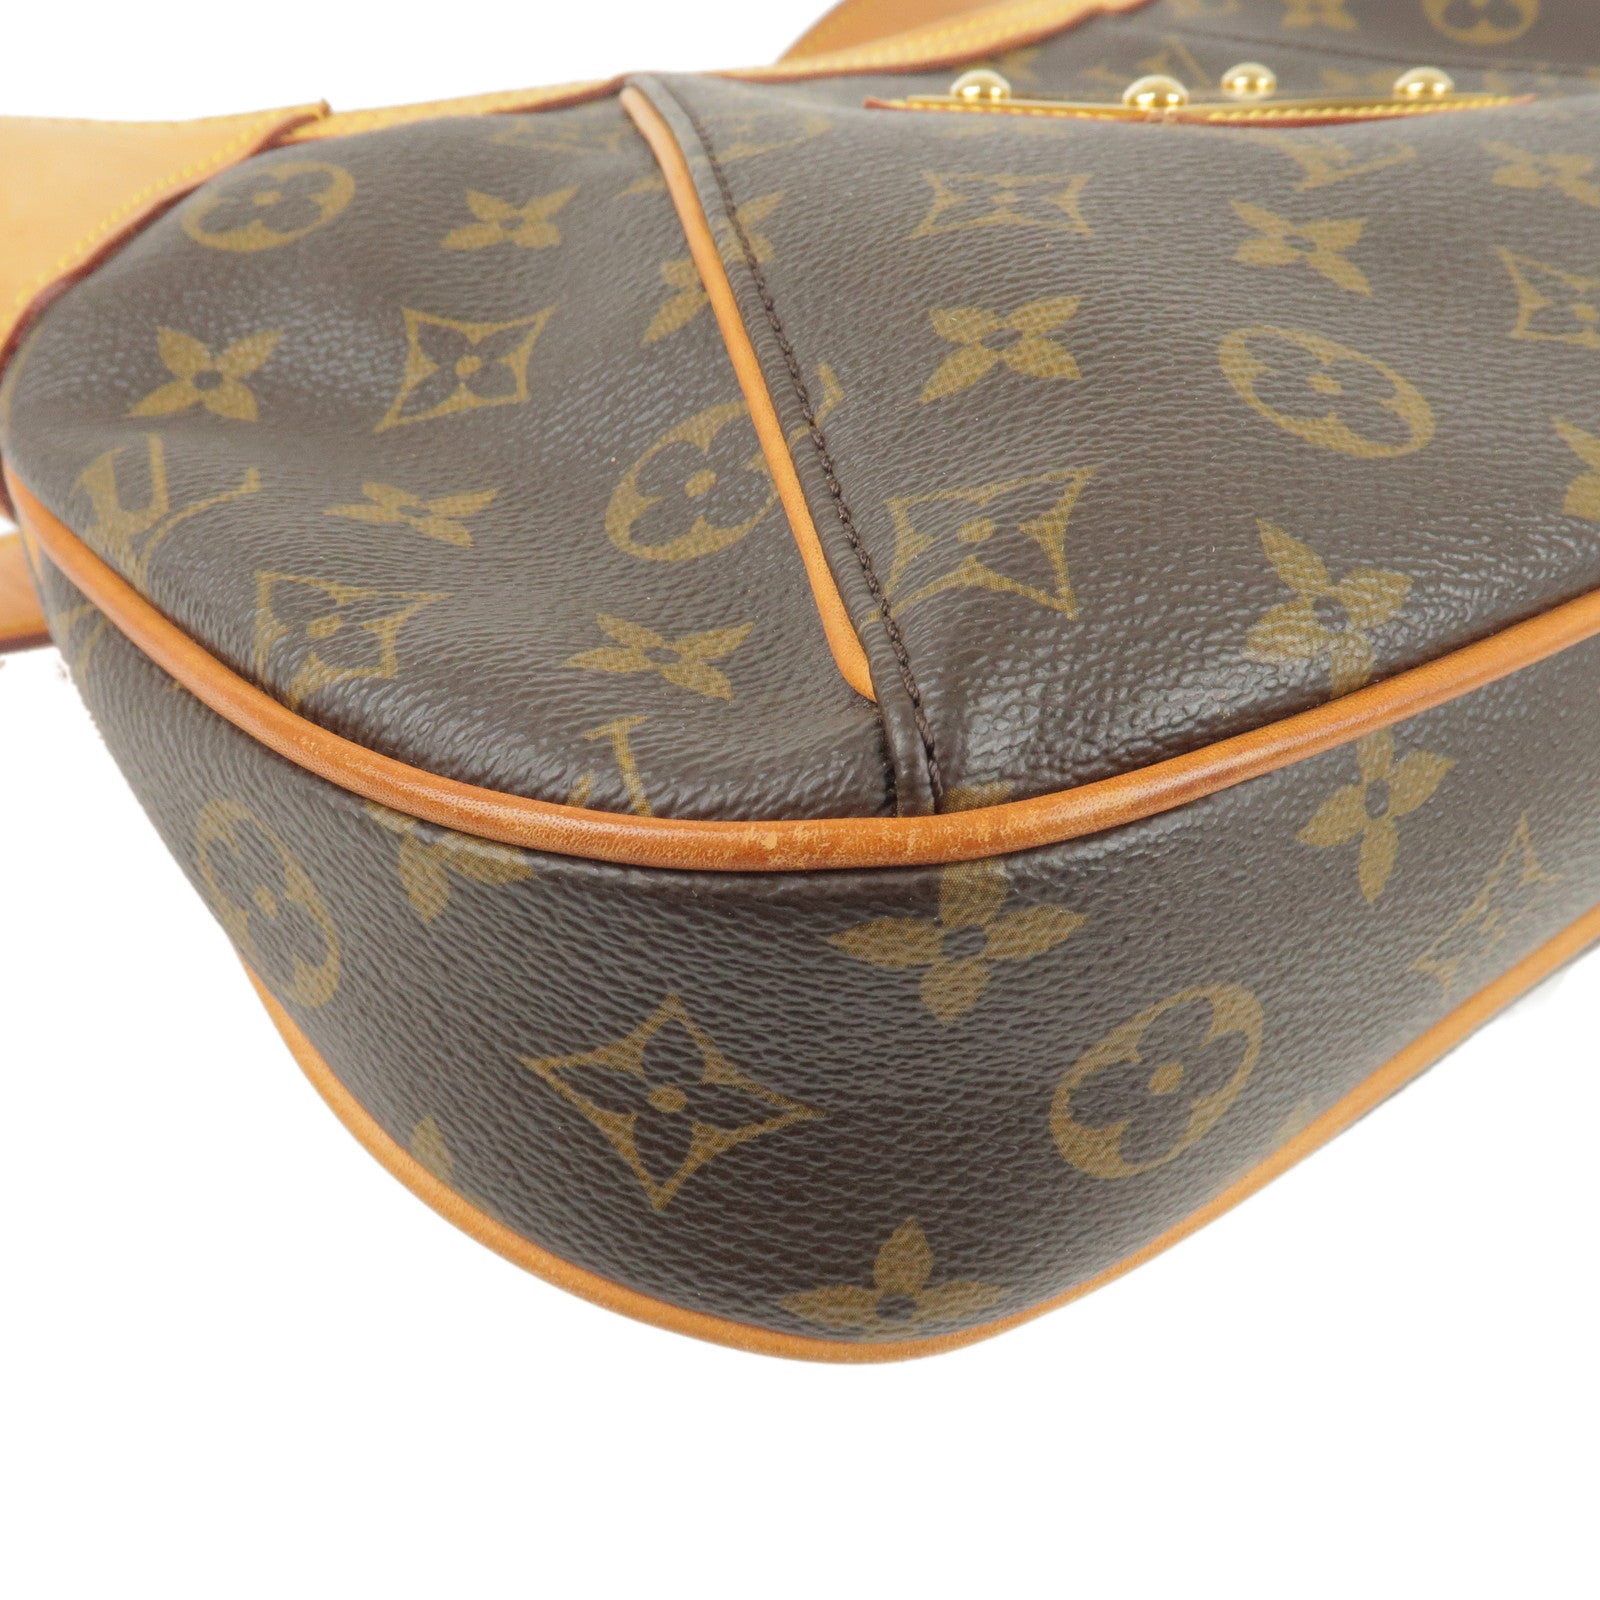 Louis Vuitton 2000s pre-owned limited edition Perlee beaded